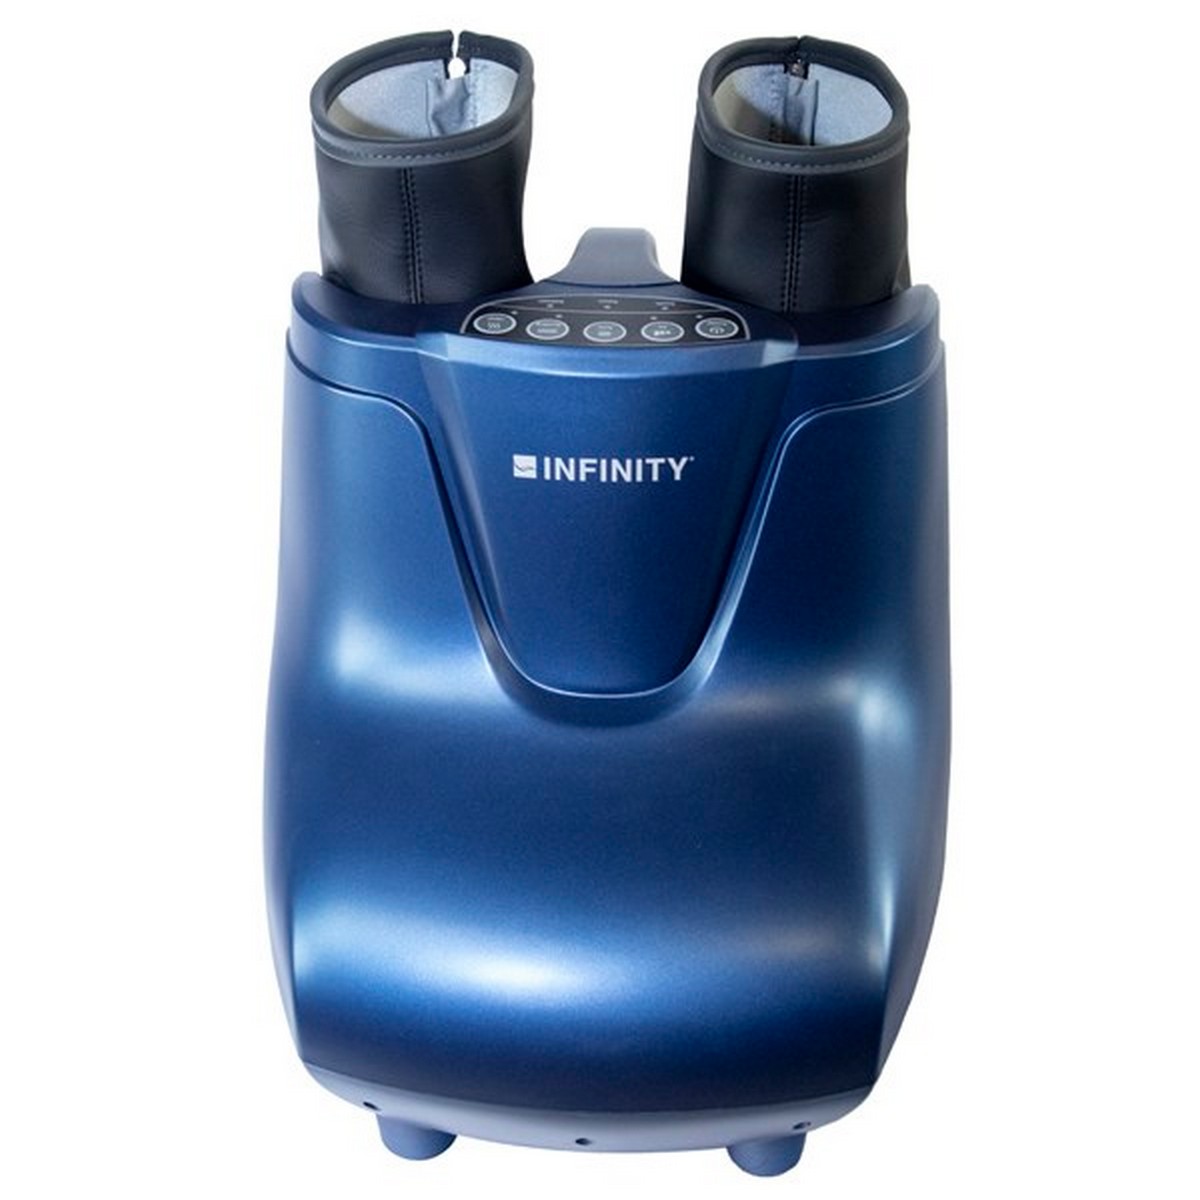 INFINITY 11035006 SHIATSU FOOT AND CALF MASSAGER IN BLUE AND BLACK